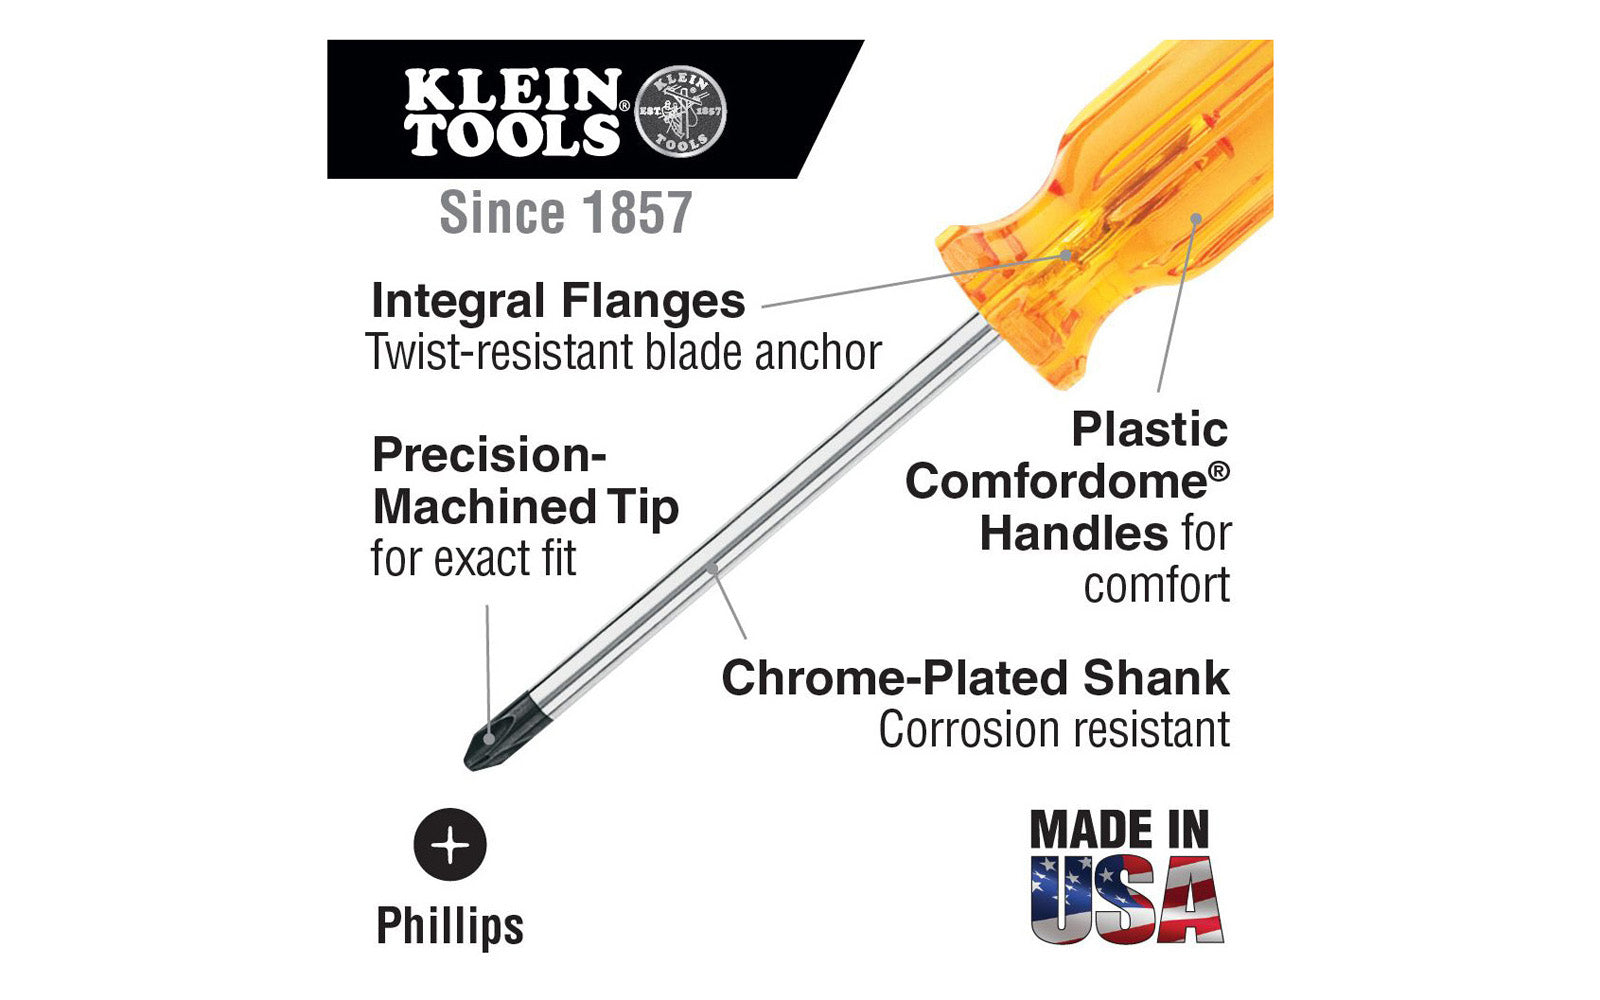 Vaco Profilated #2 Phillips Screwdriver - 20" Blade. Precision-forged & polished blades with black tips. Long Klein Tools Phillips Screwdriver. Tough amber, smooth Comfordome handle. Chrome-plated shaft. Made in USA.